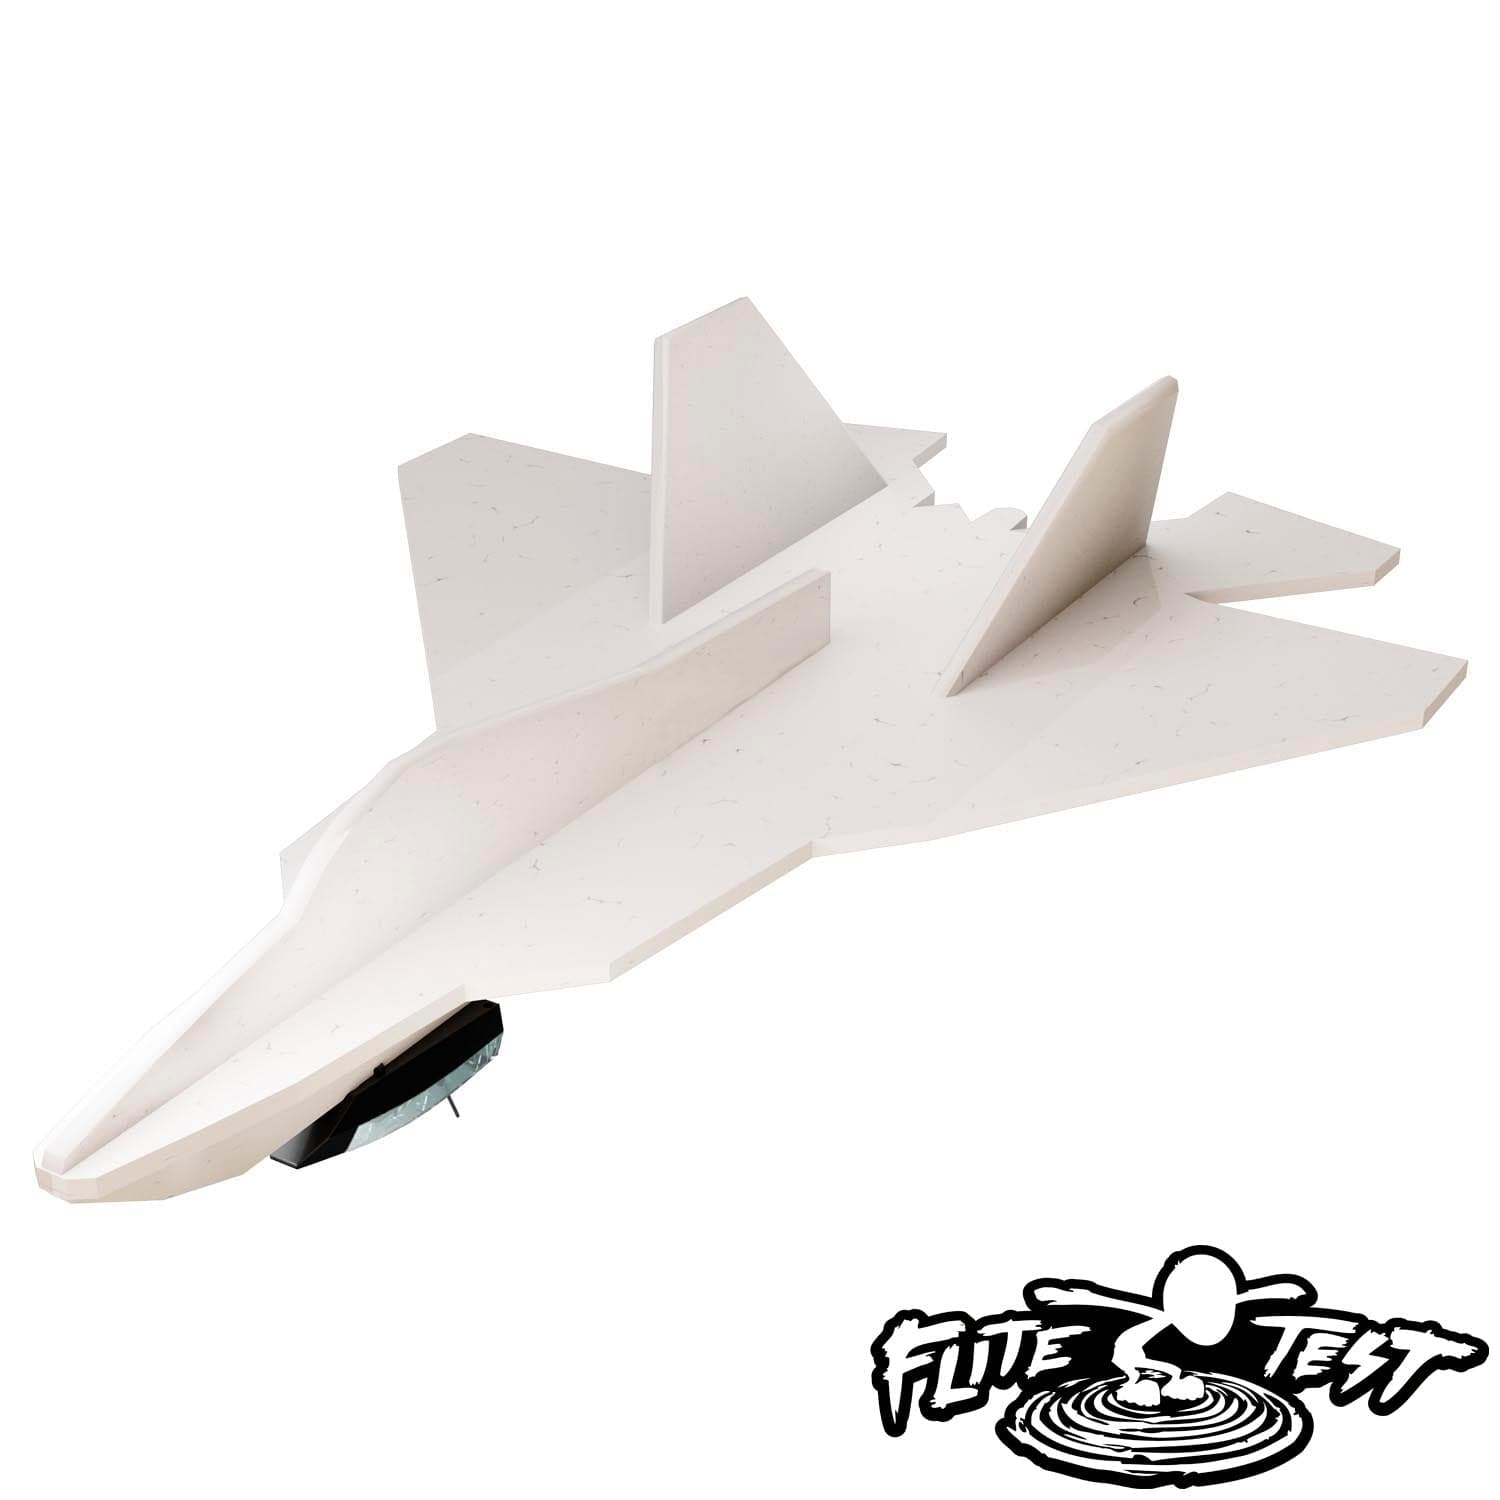 PowerUp 4.0 Electric Paper Airplane Kit - Home Science Tools